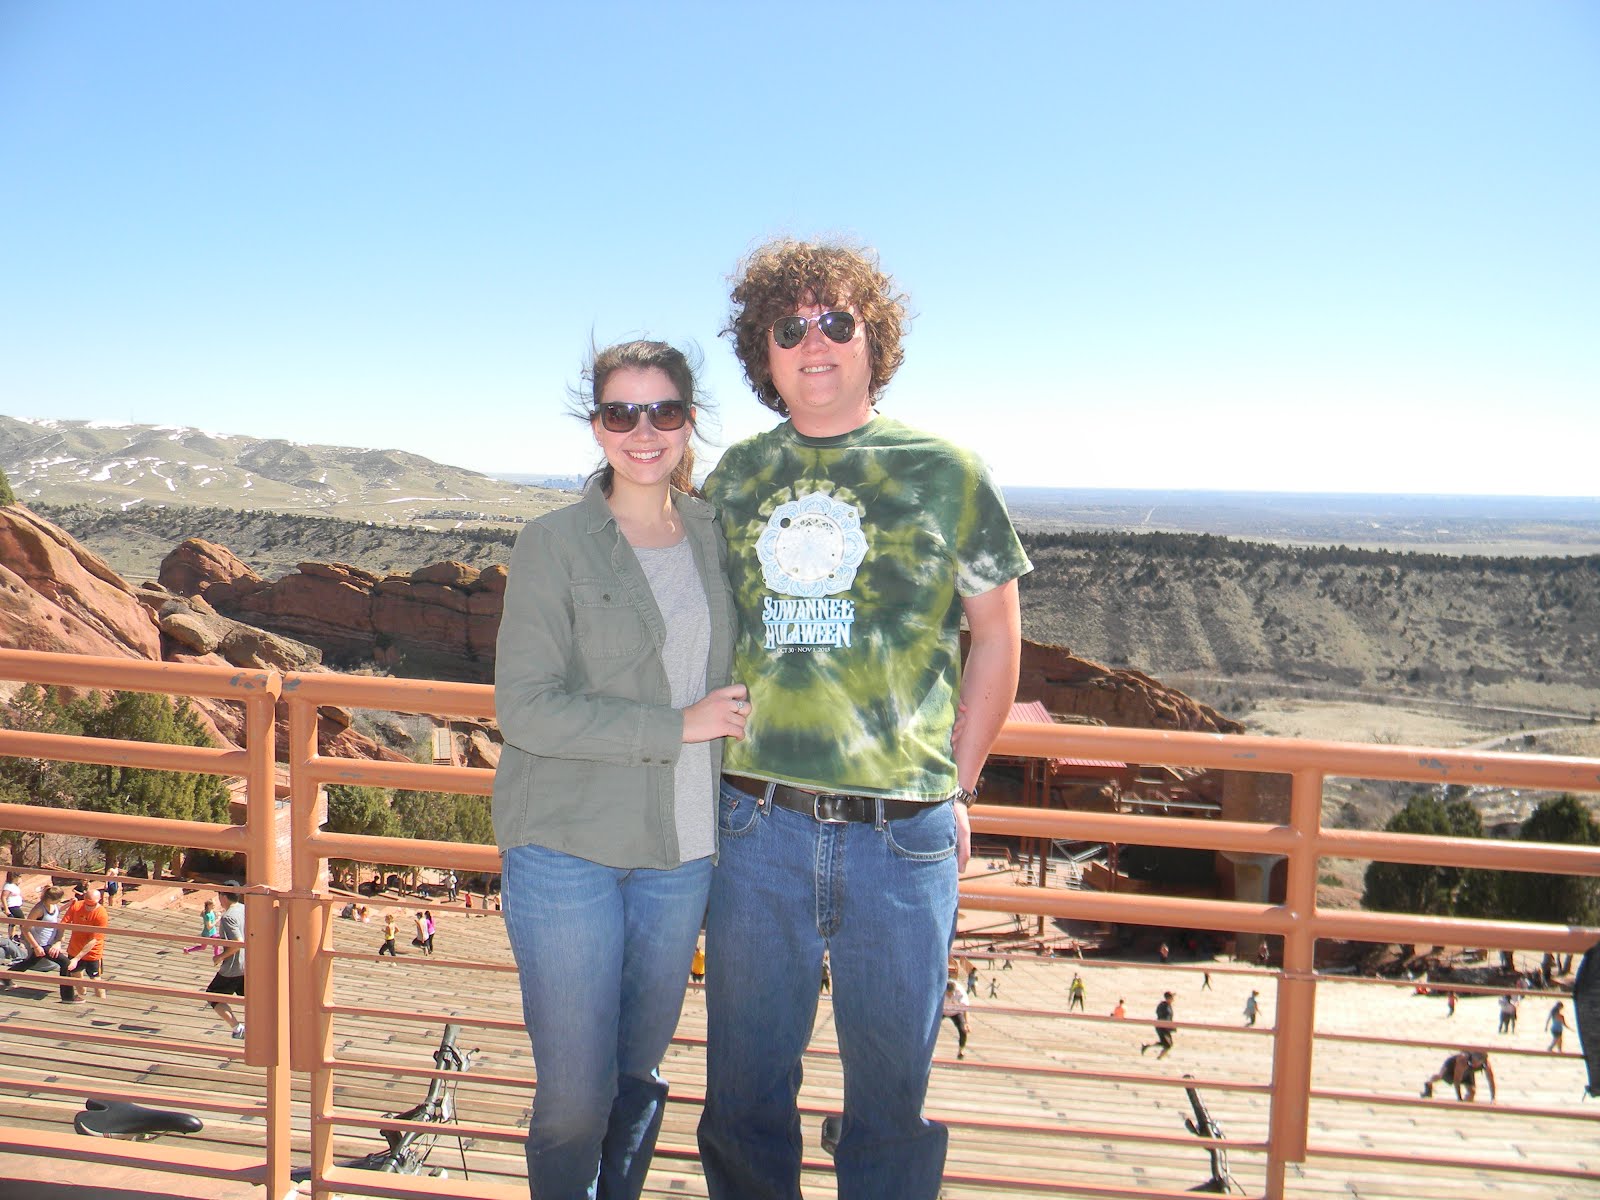 At the Red Rocks overlook